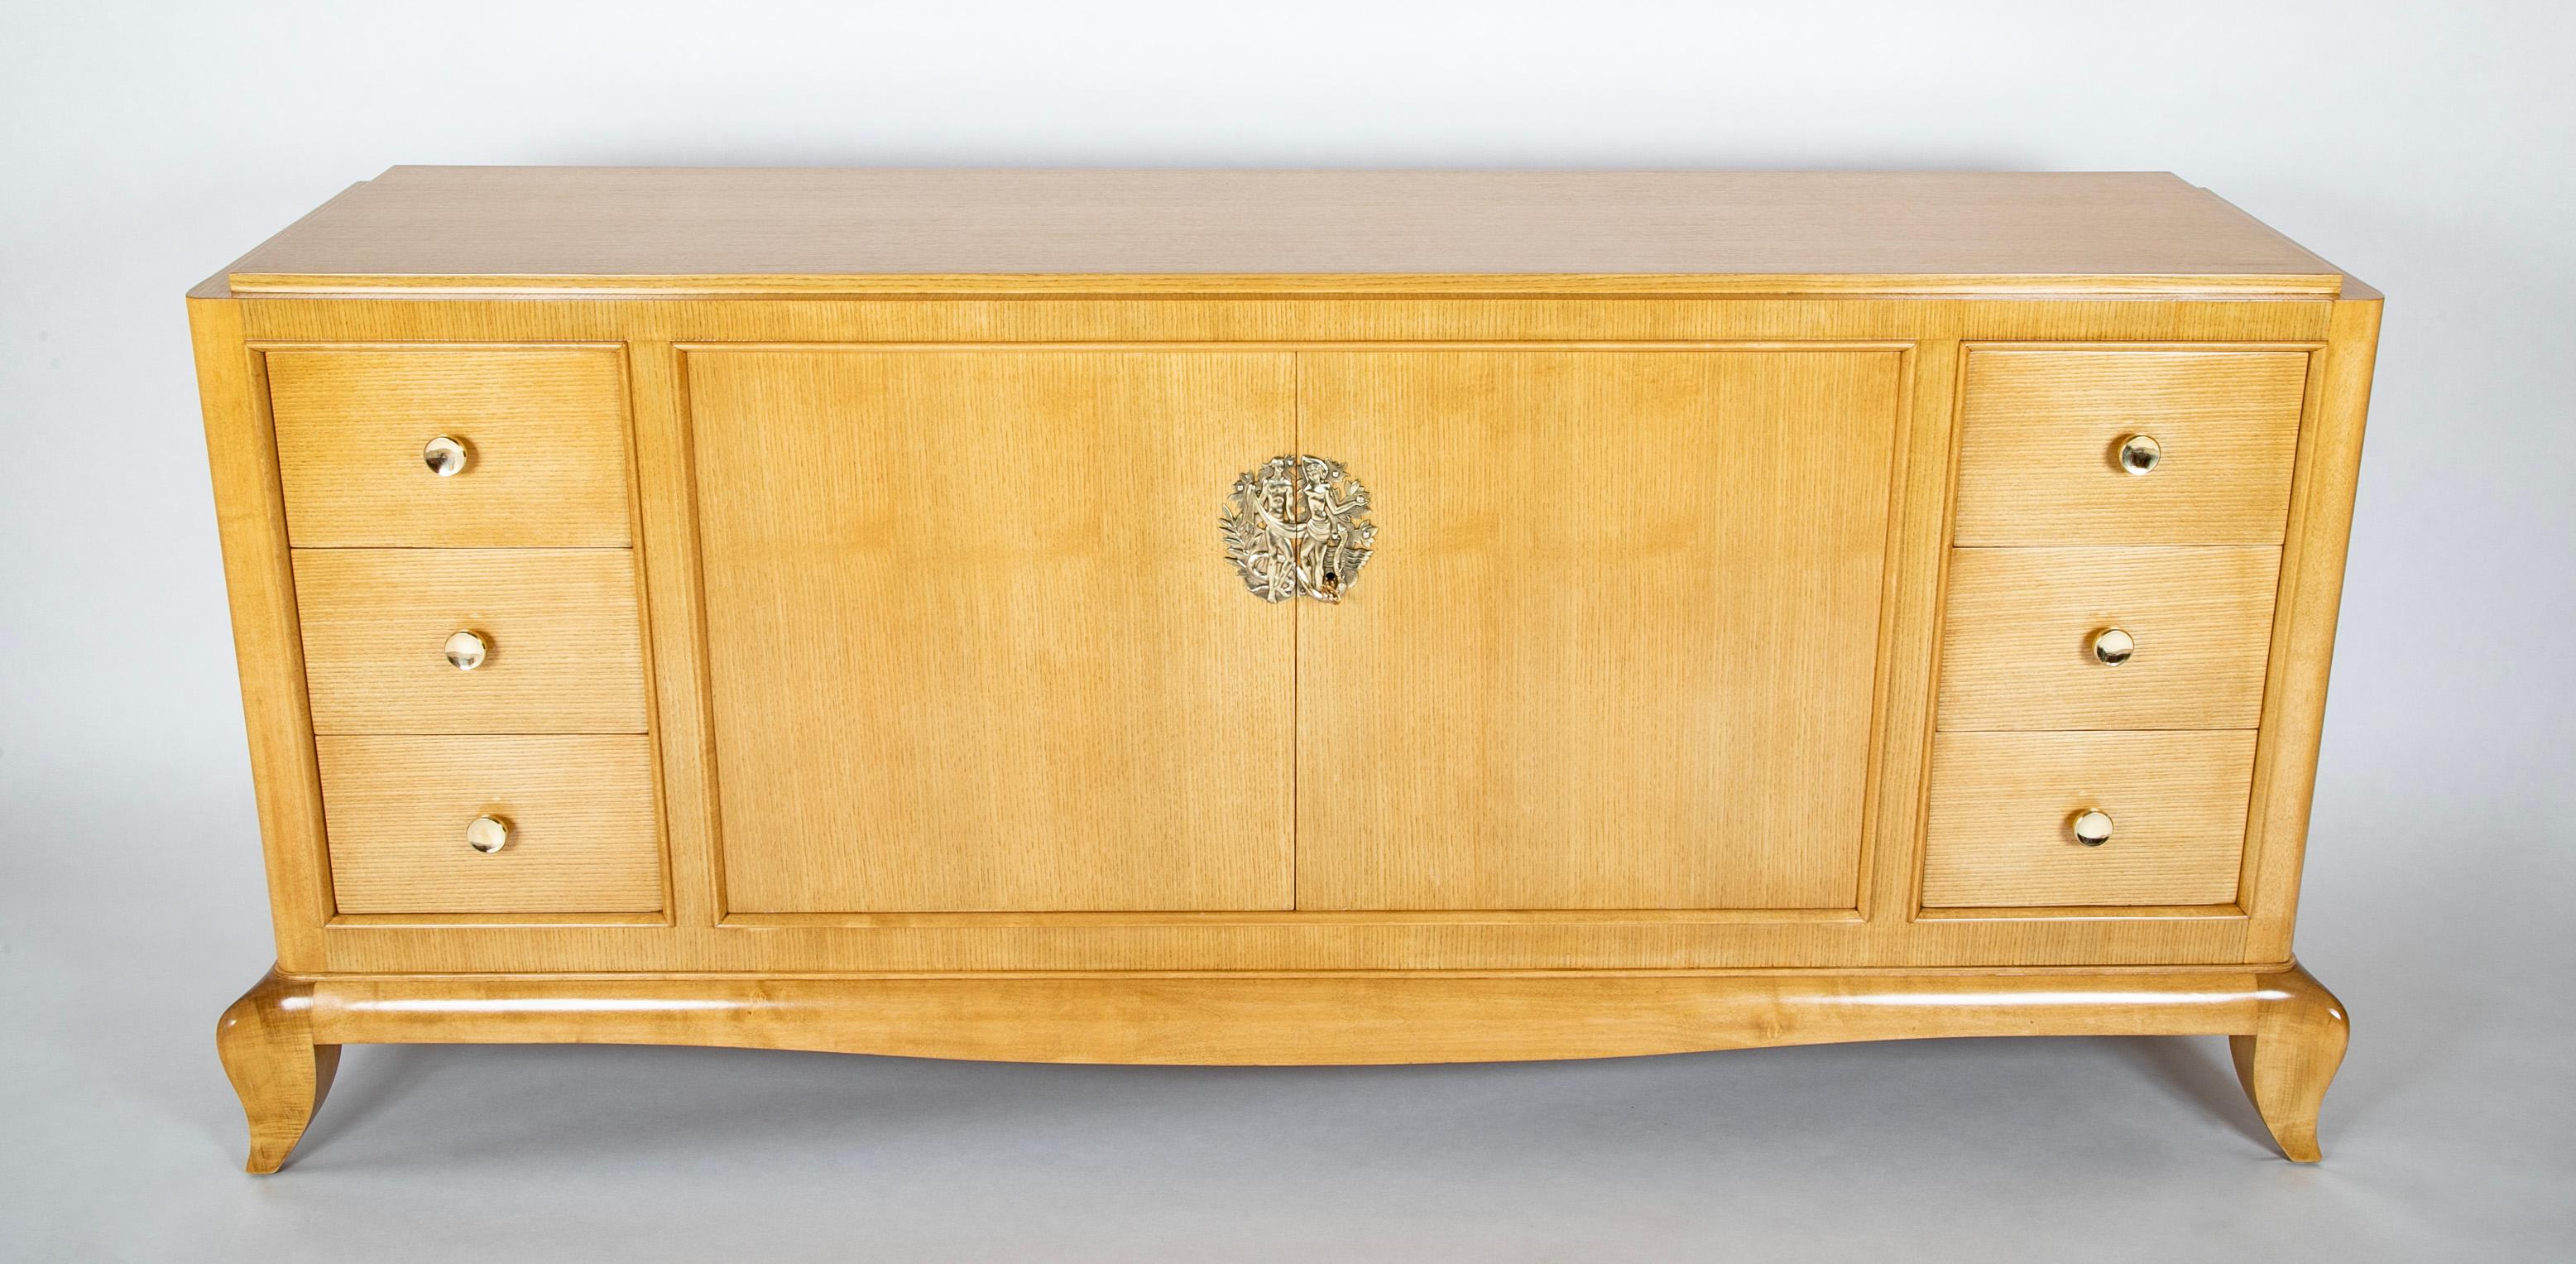 French School of Arbus 6 drawer credenza in veneered light wood with 2 center doors and Adam & Eve Medallion.   Circa 1940's.